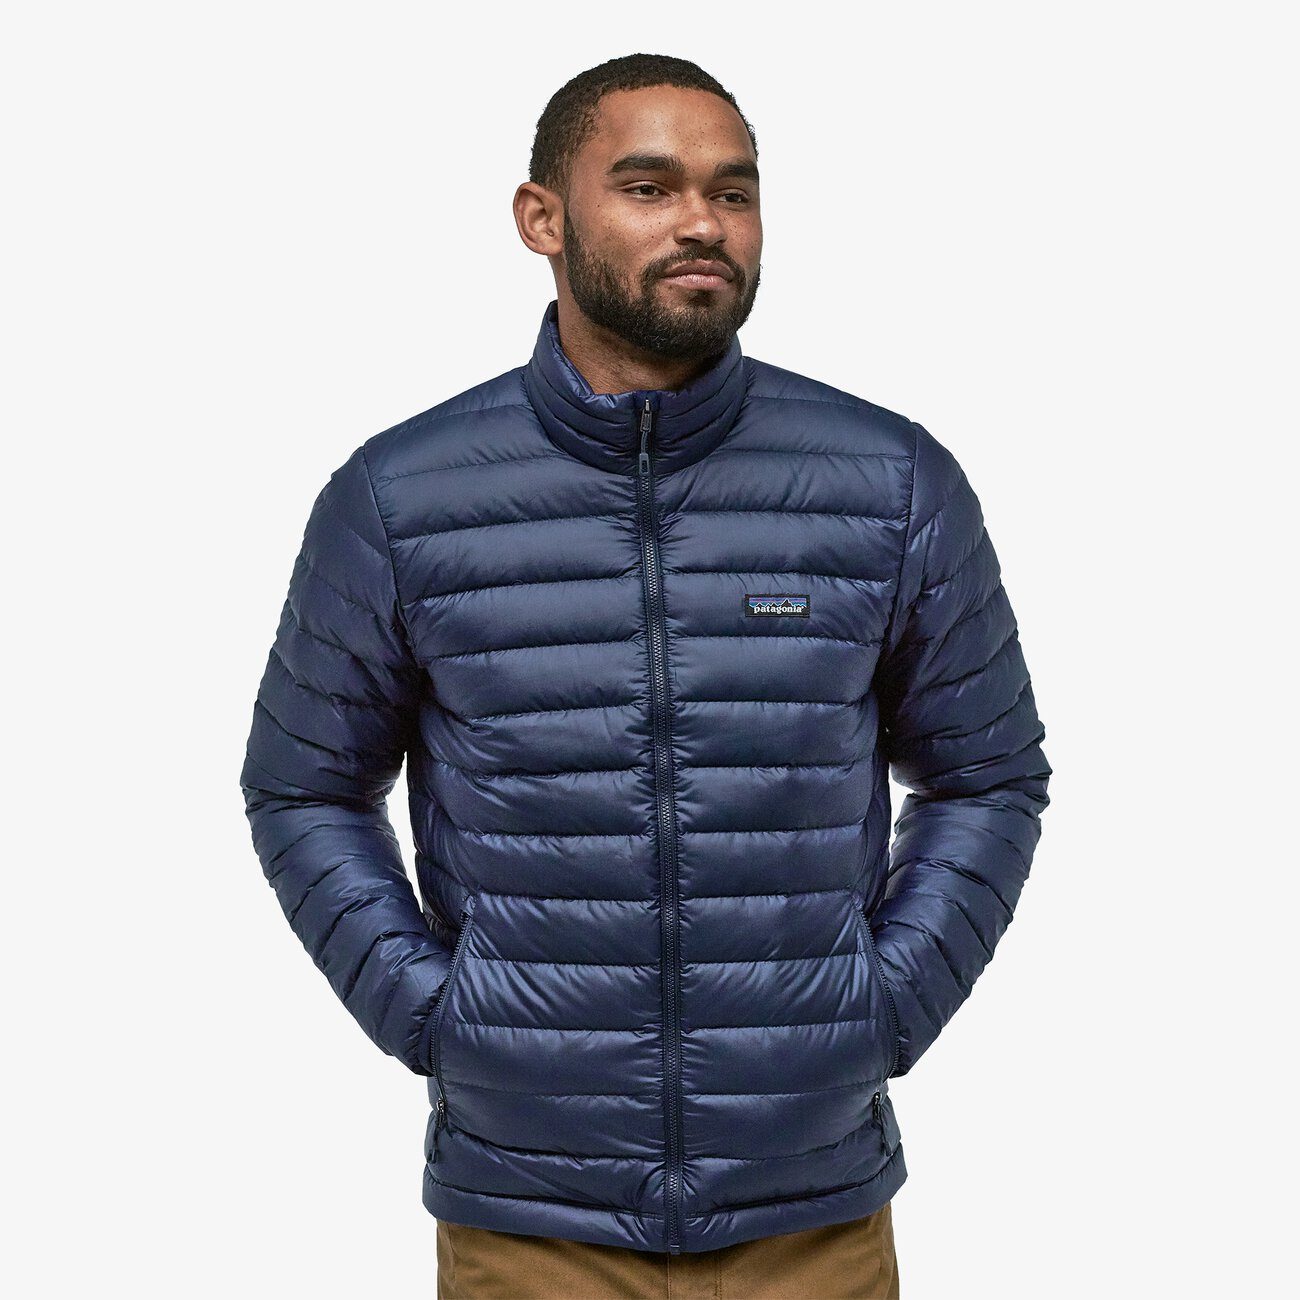 Patagonia Men's Down Sweater Jacket - Ethical down/Recycled polyester, Classic Navy w/Classic Navy / XL